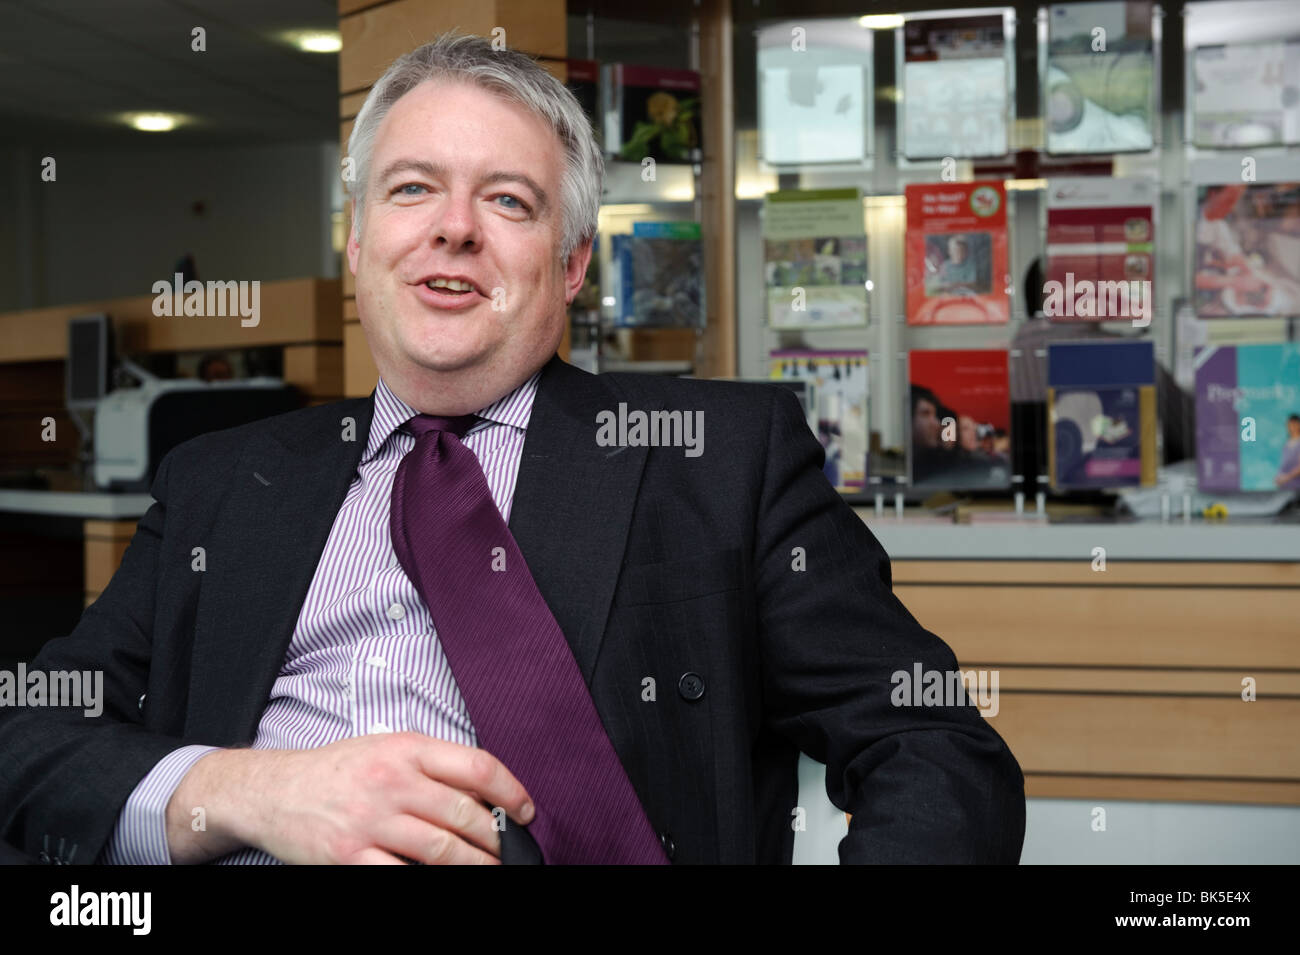 Carwyn Jones, First Minister at the Wales Assembly Government, Stock Photo